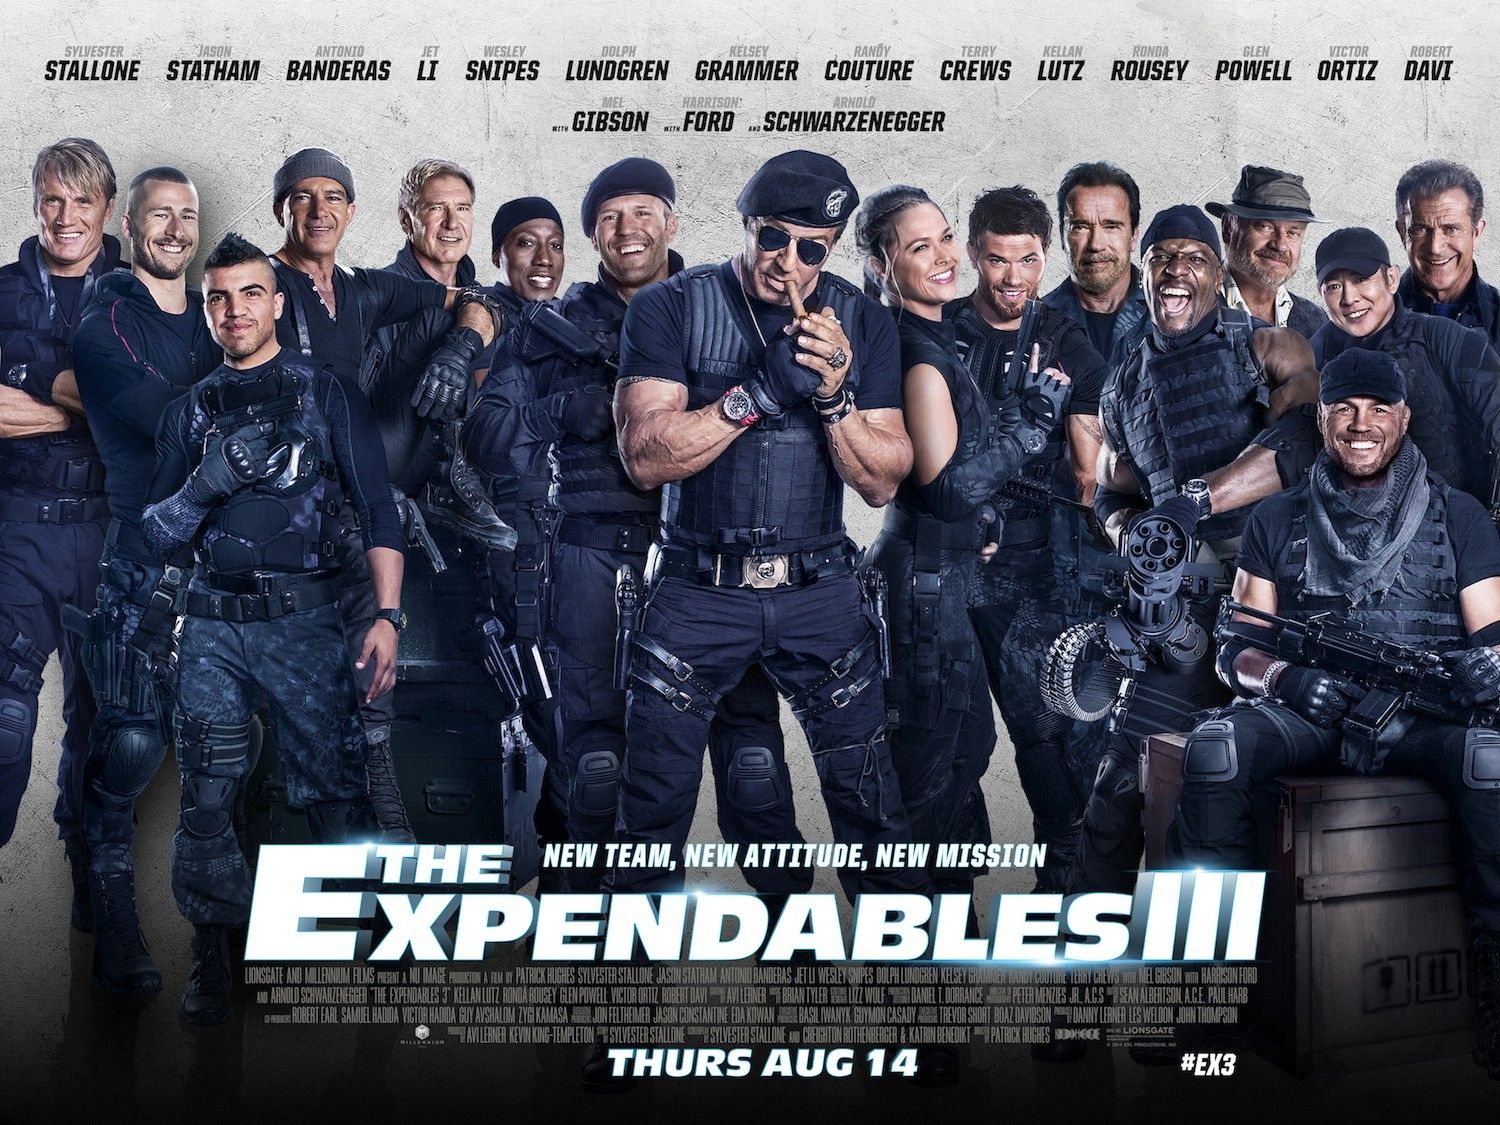 Amazing The Expendables 3 Pictures & Backgrounds